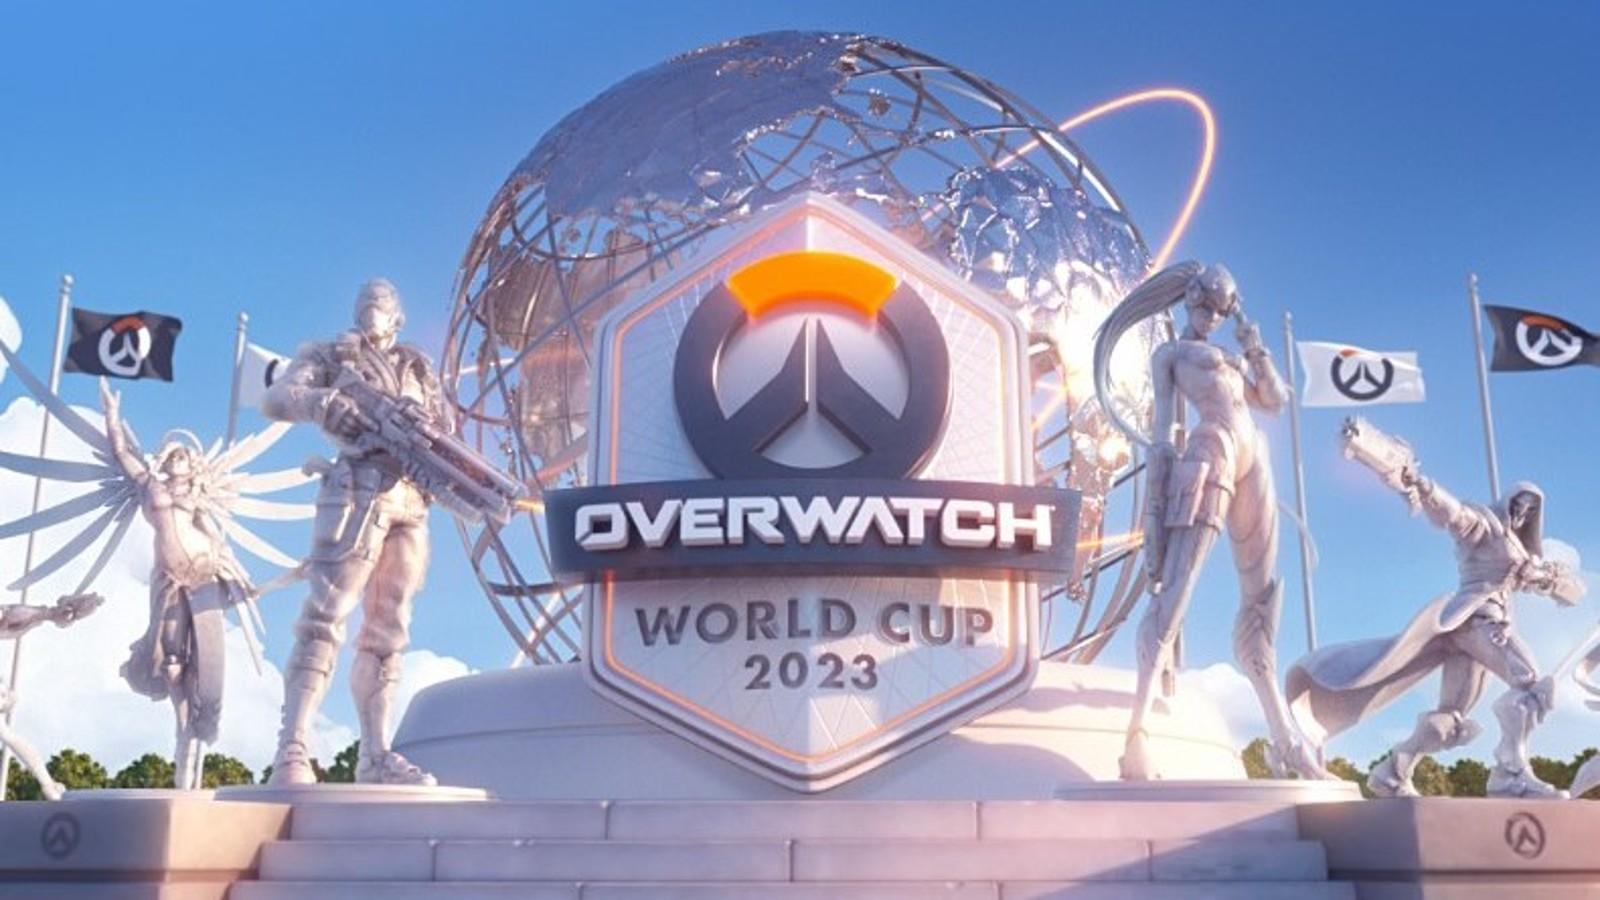 Graphic for Overwatch 2023 World Cup